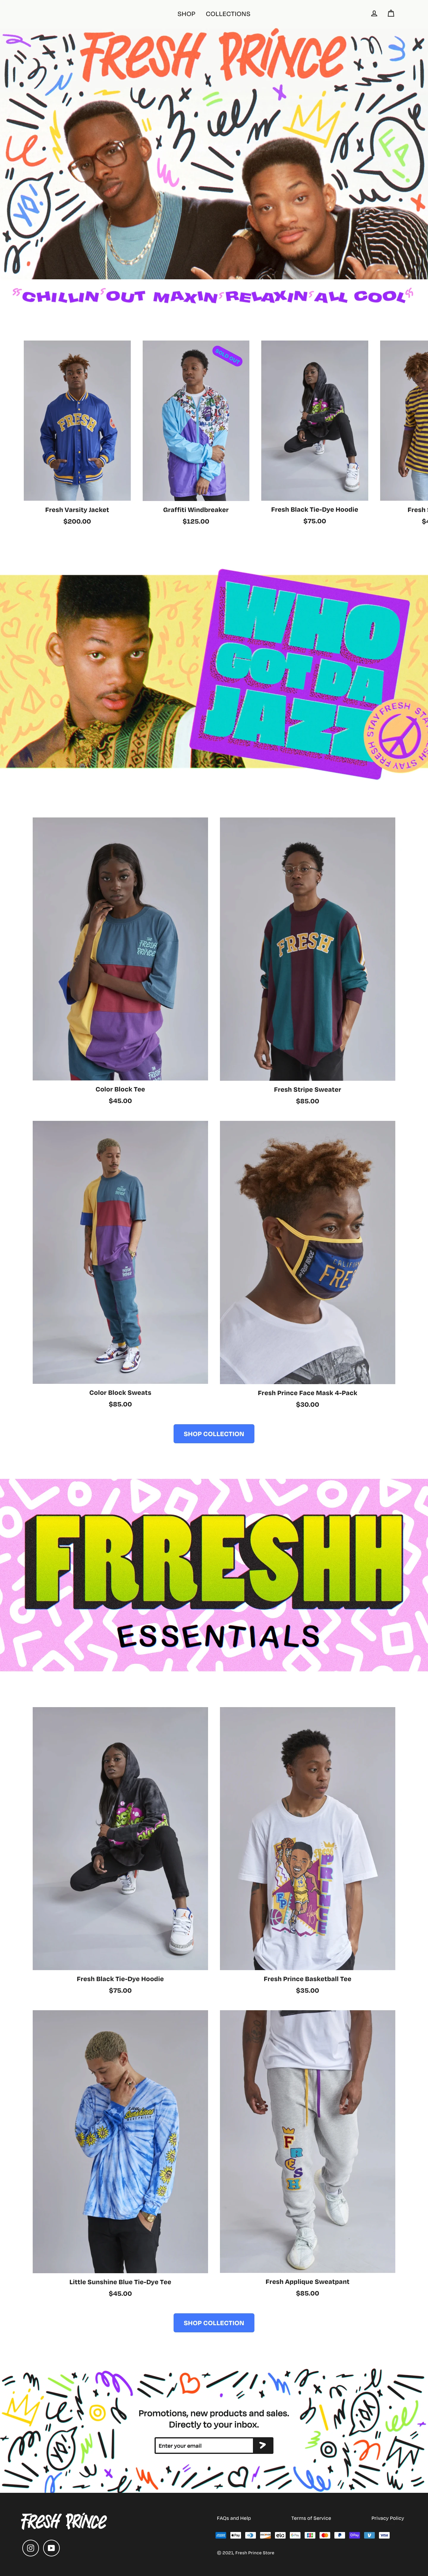 Fresh Prince Store Landing Page Example: Fresh Prince Collection featuring premium, exclusive apparel and gear is available for a limited time only.